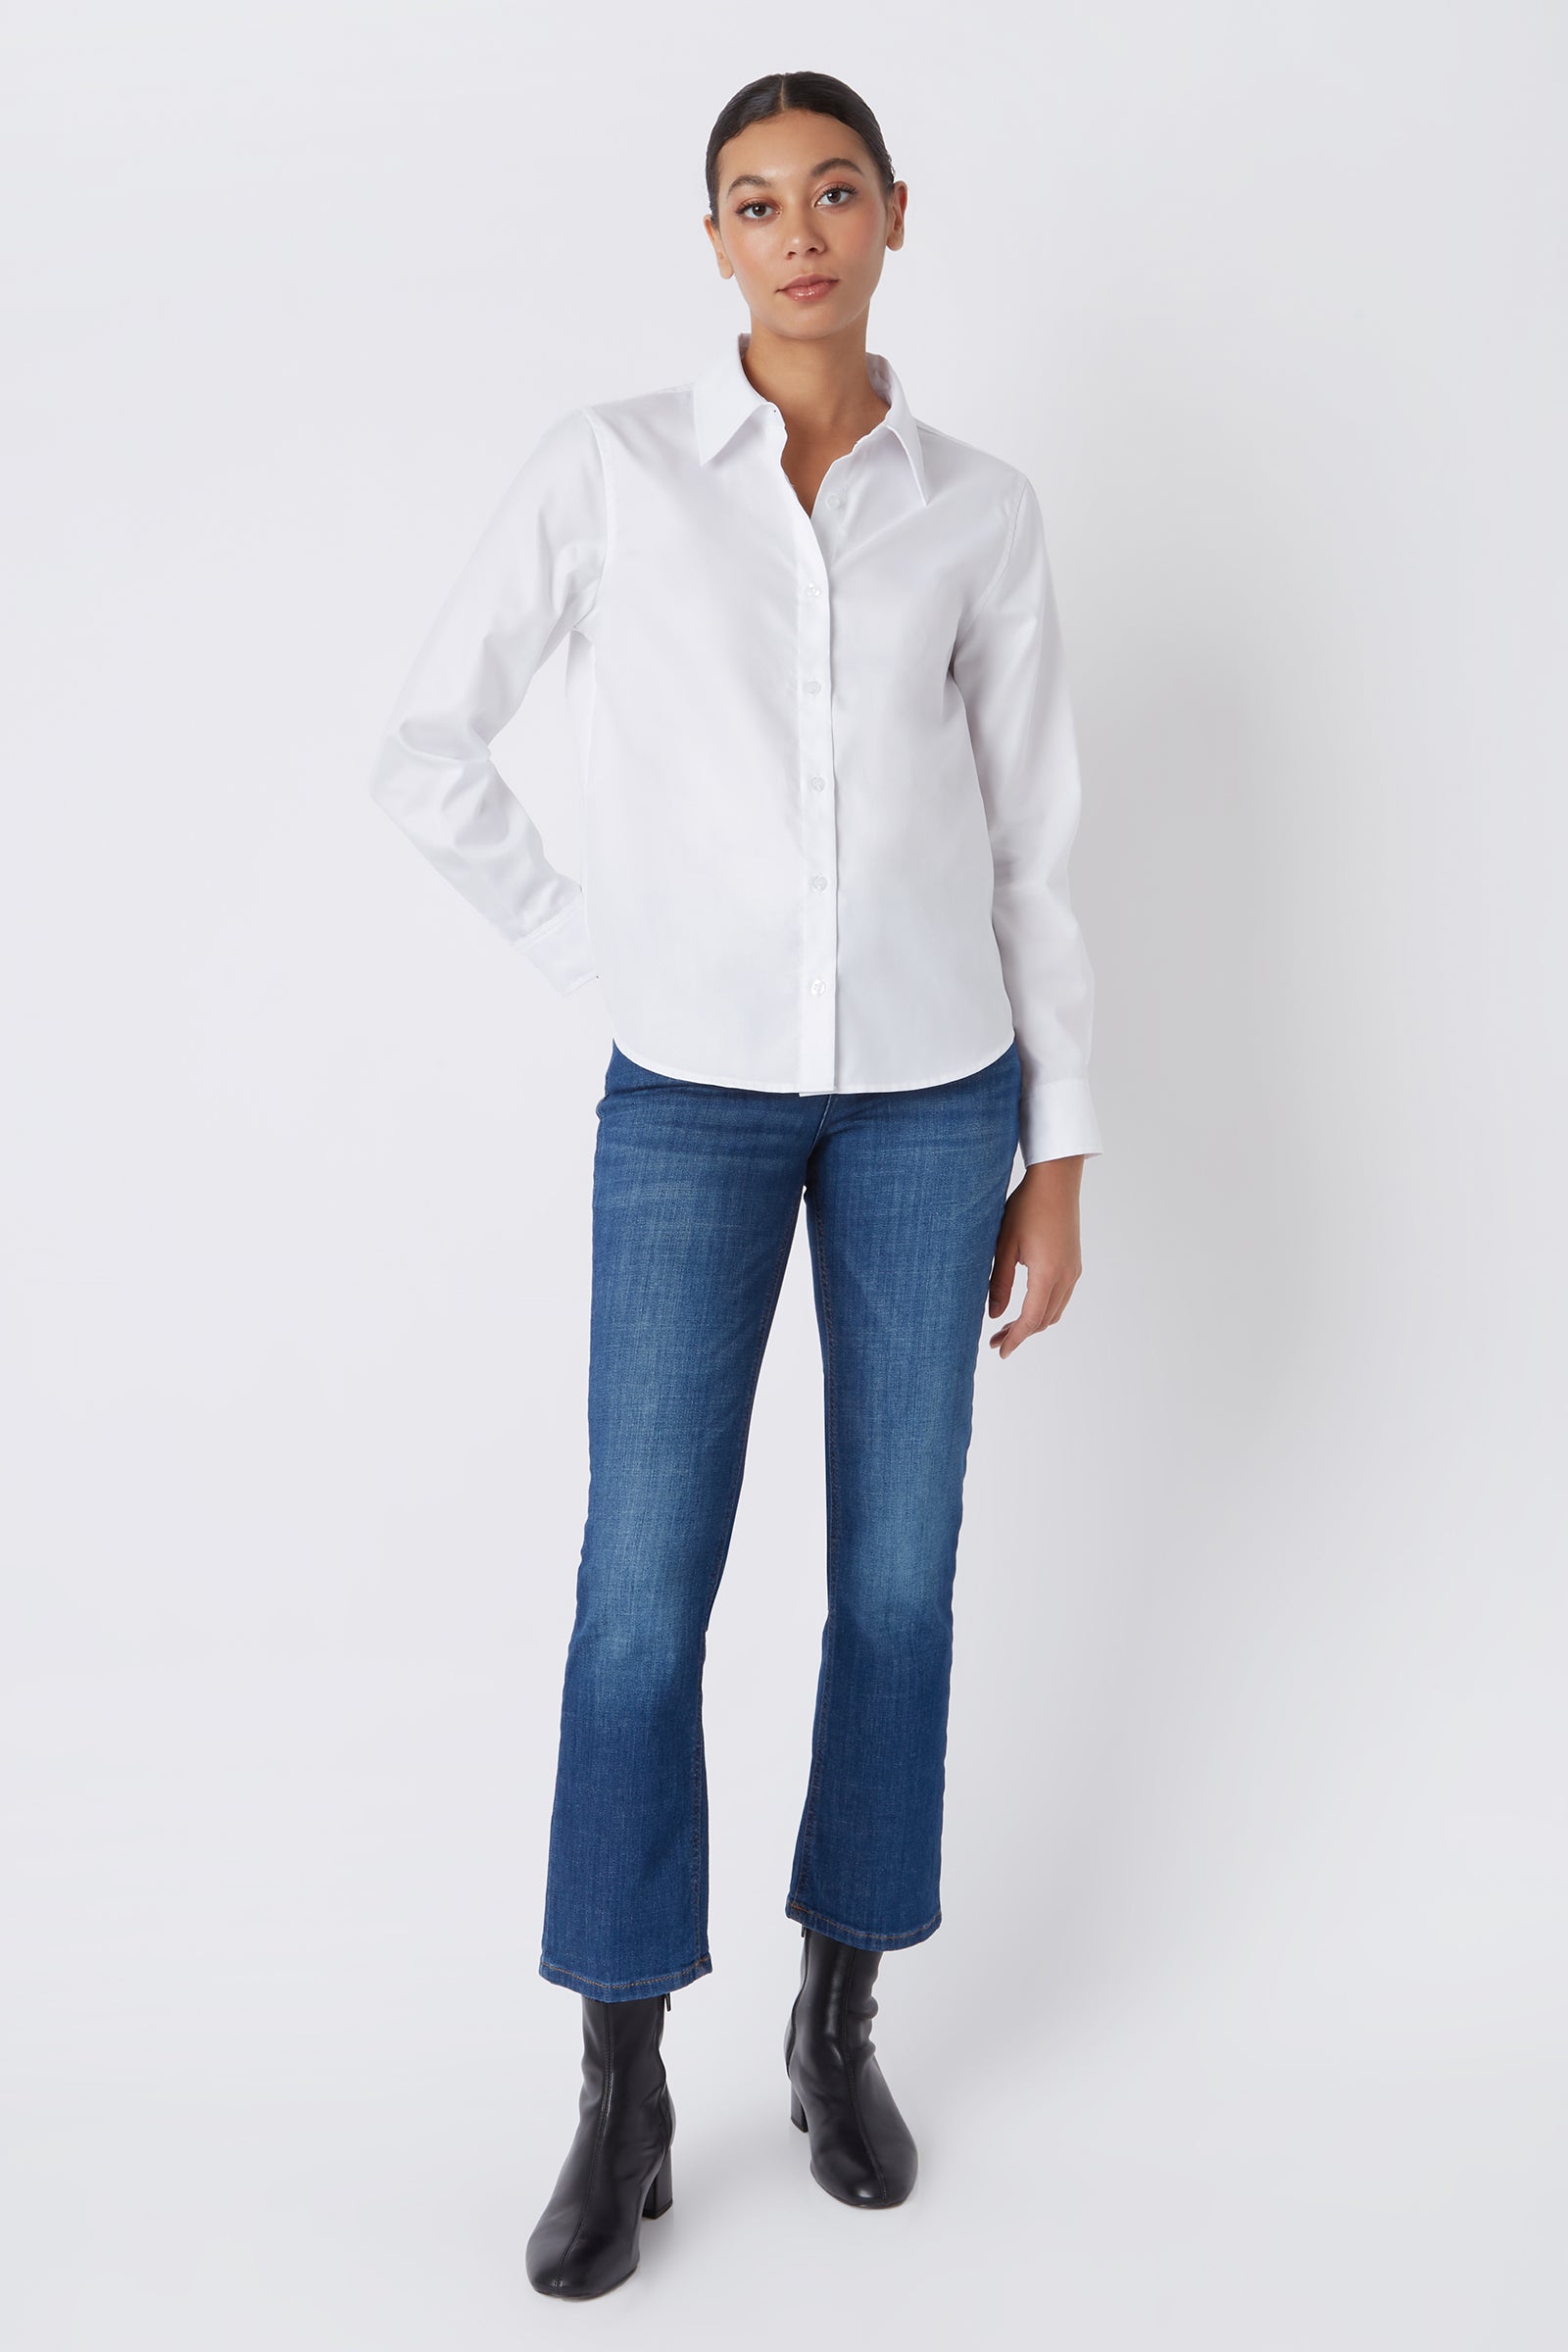 Kal Rieman Classic Tailored Shirt in White Stretch on Model Full Front View